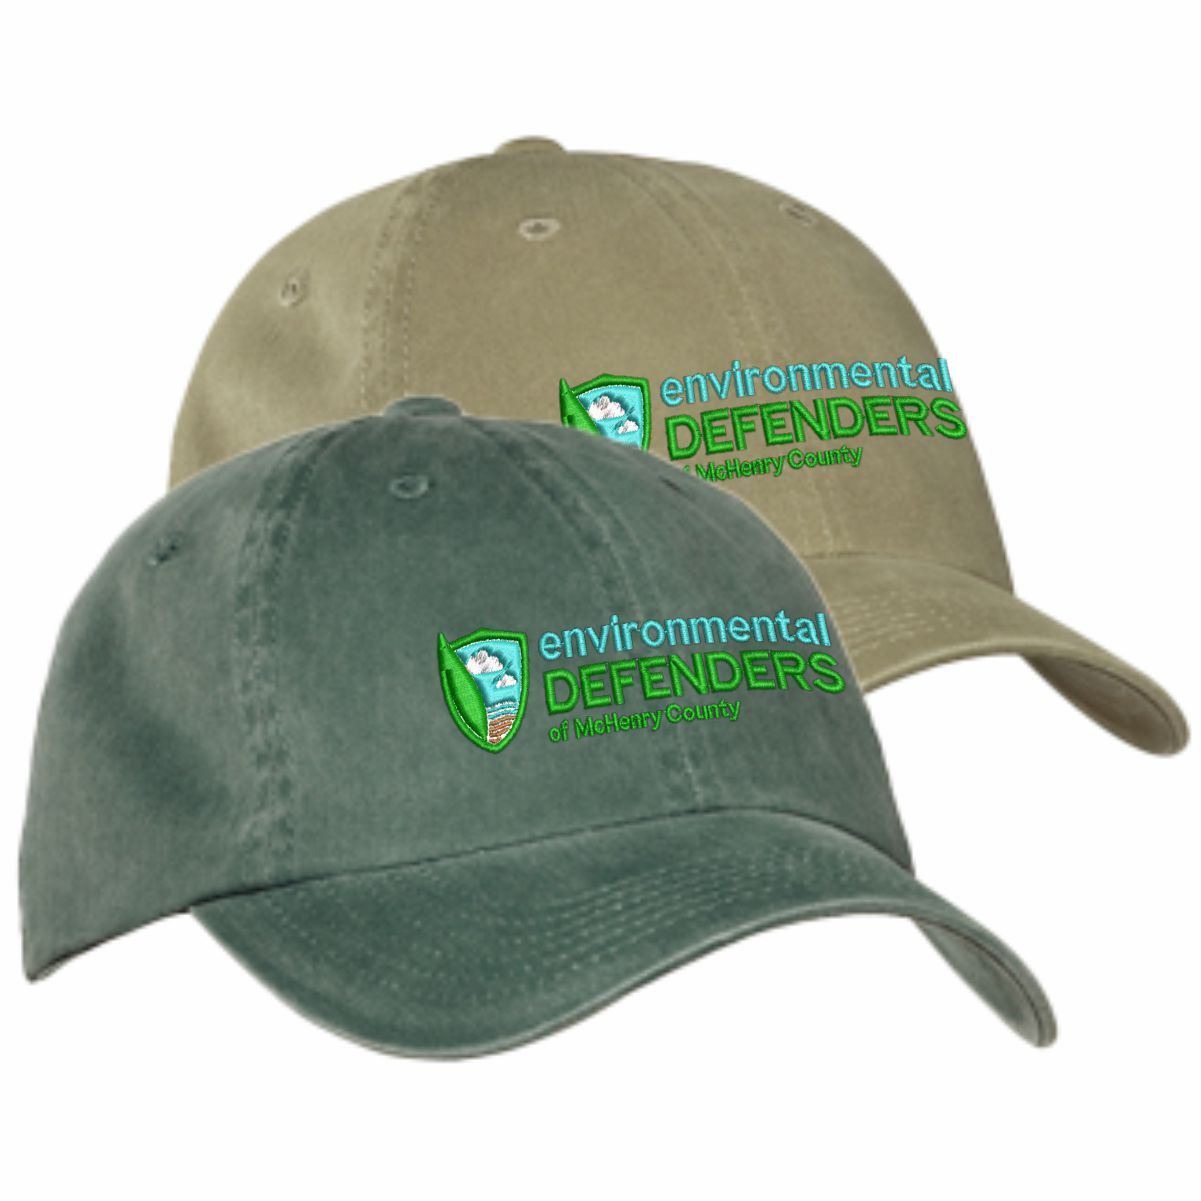 Environmental Defenders Unstructured Garment Washed Cap | HyperStitch, Inc